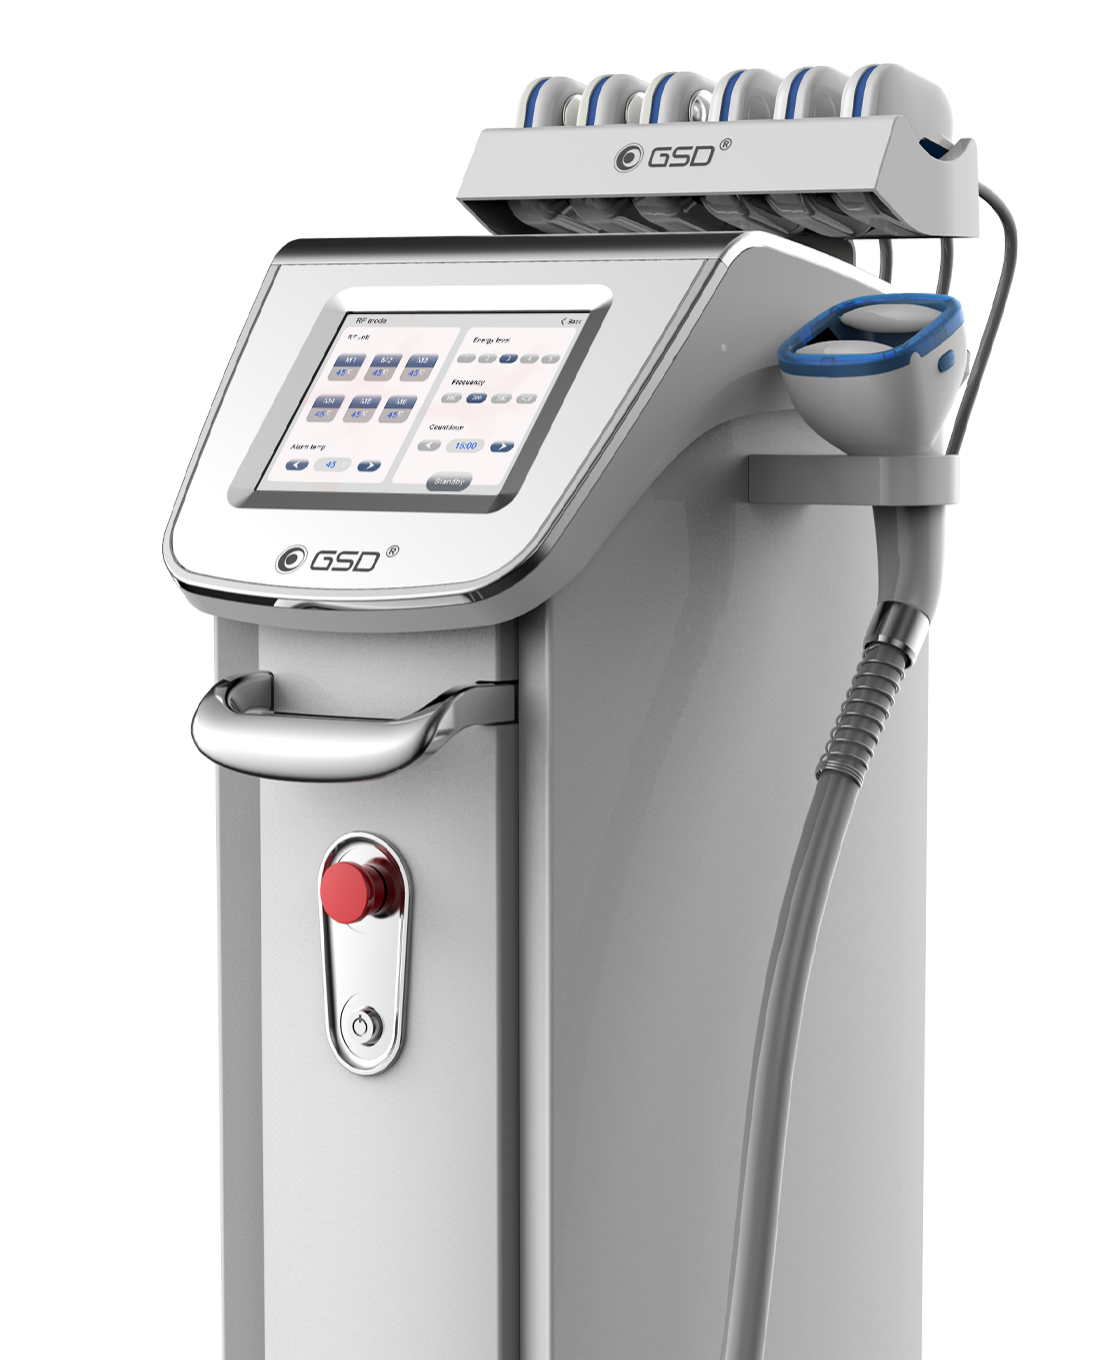 The newest body sculpting machine in 2022! GSD Therma Sculpt with Dynamic Lipo RF function